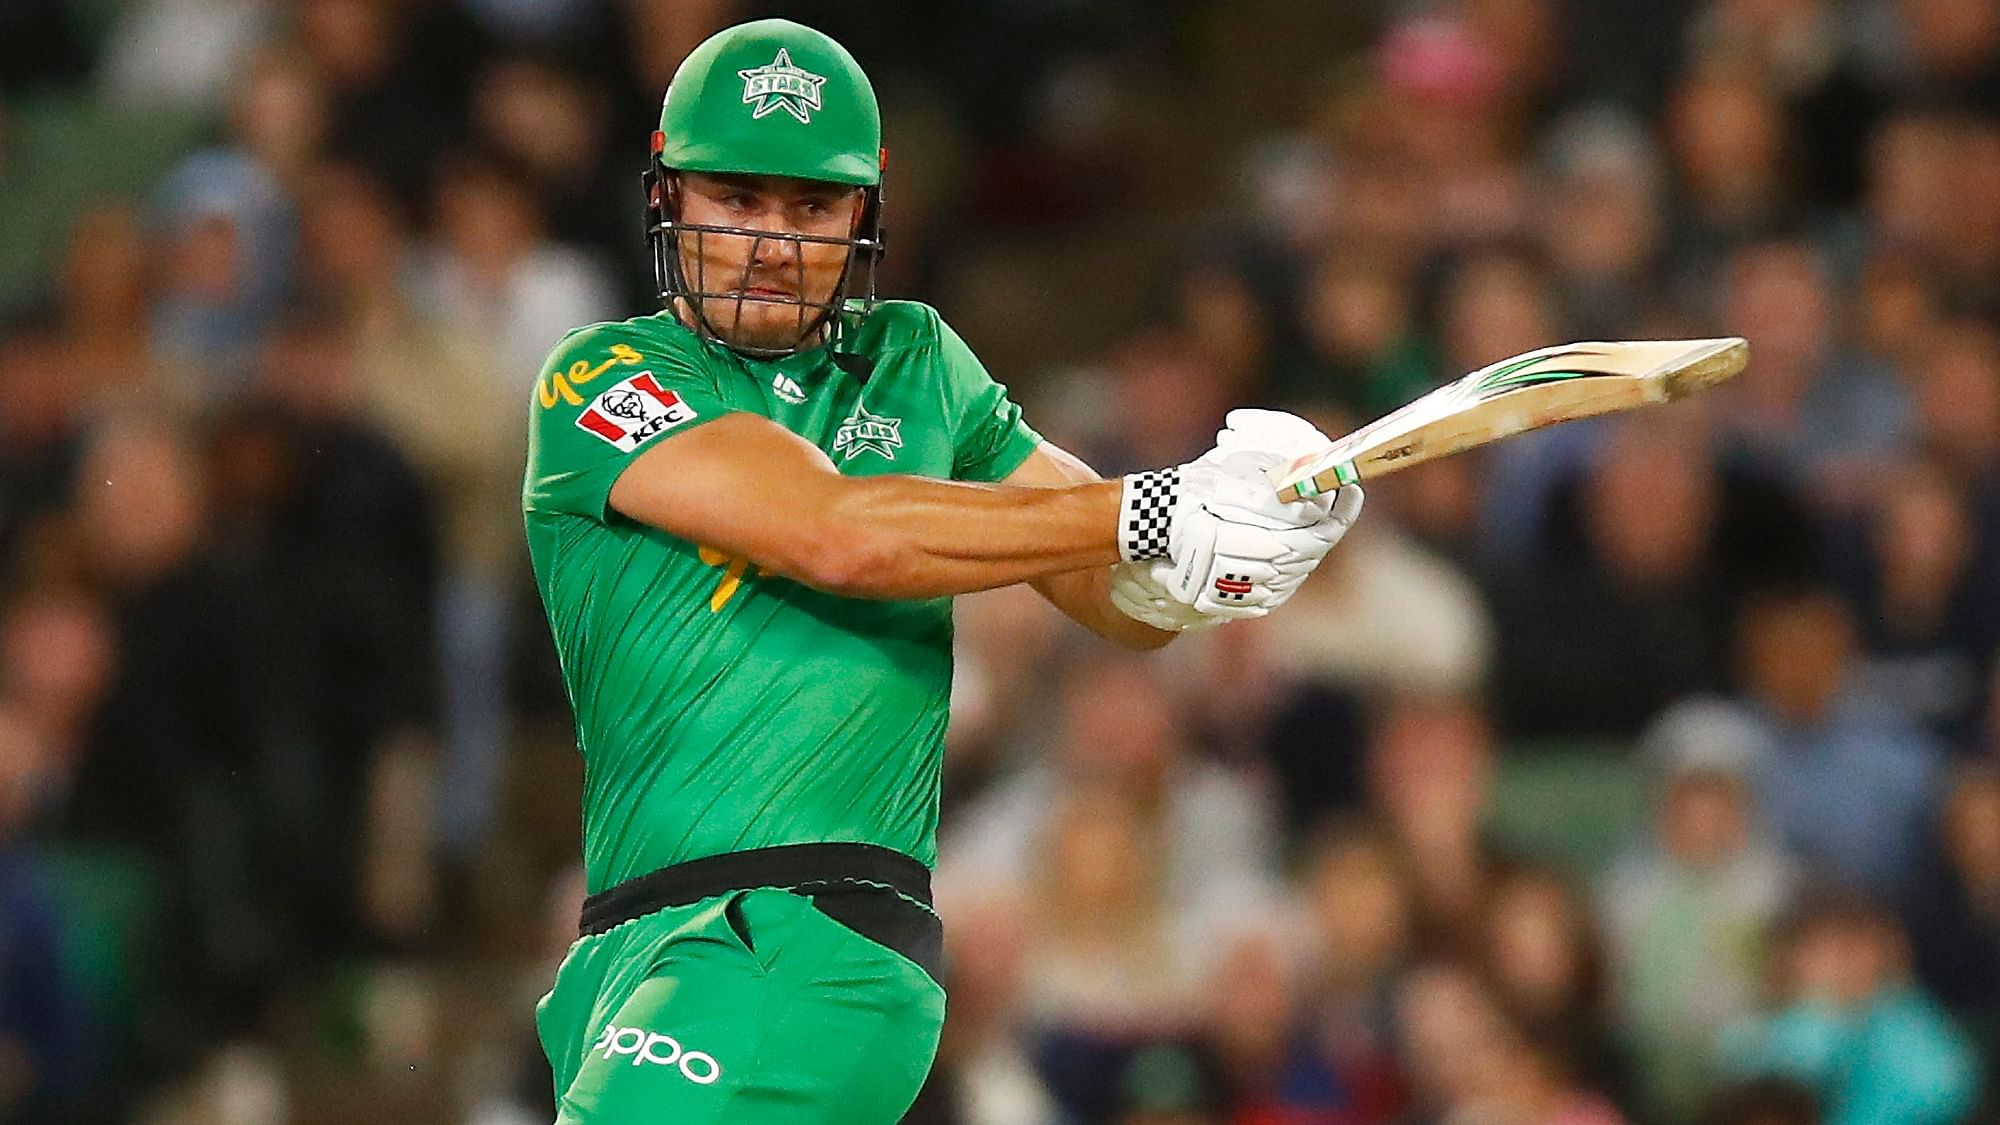 All rounder Marcus Stoinis was on Sunday, 5 January fined heavily for directing a homophobic slur at Kane Richardson during a Big Bash League match on Sunday, 5 January.